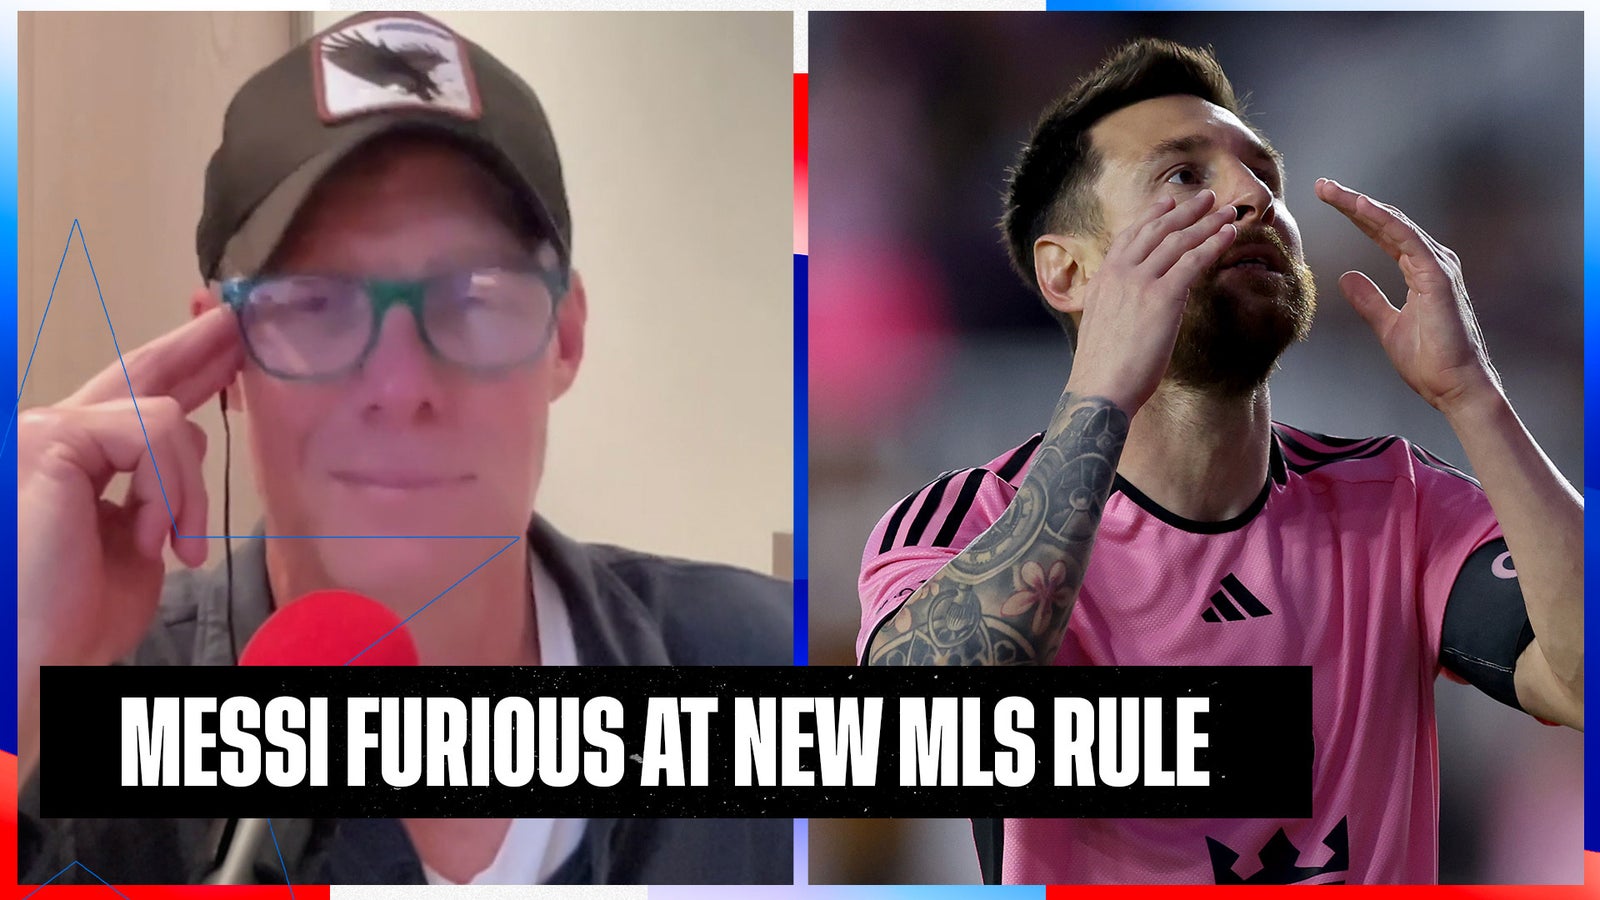 Lionel Messi furious at new MLS rule during Inter Miami's match vs. Montreal